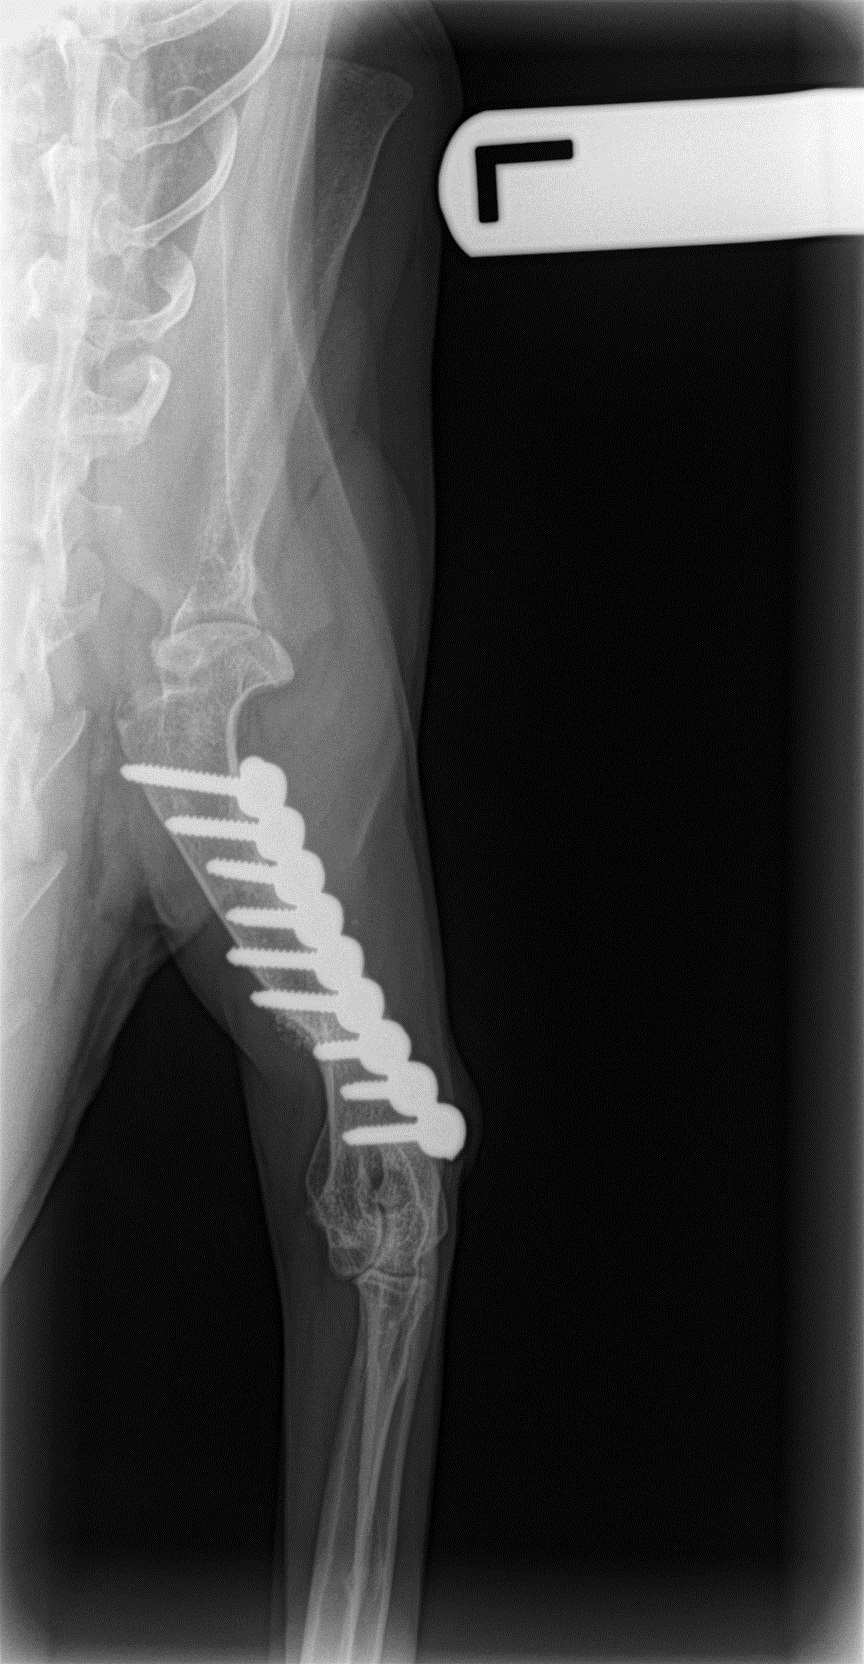 More x-rays after 2 months